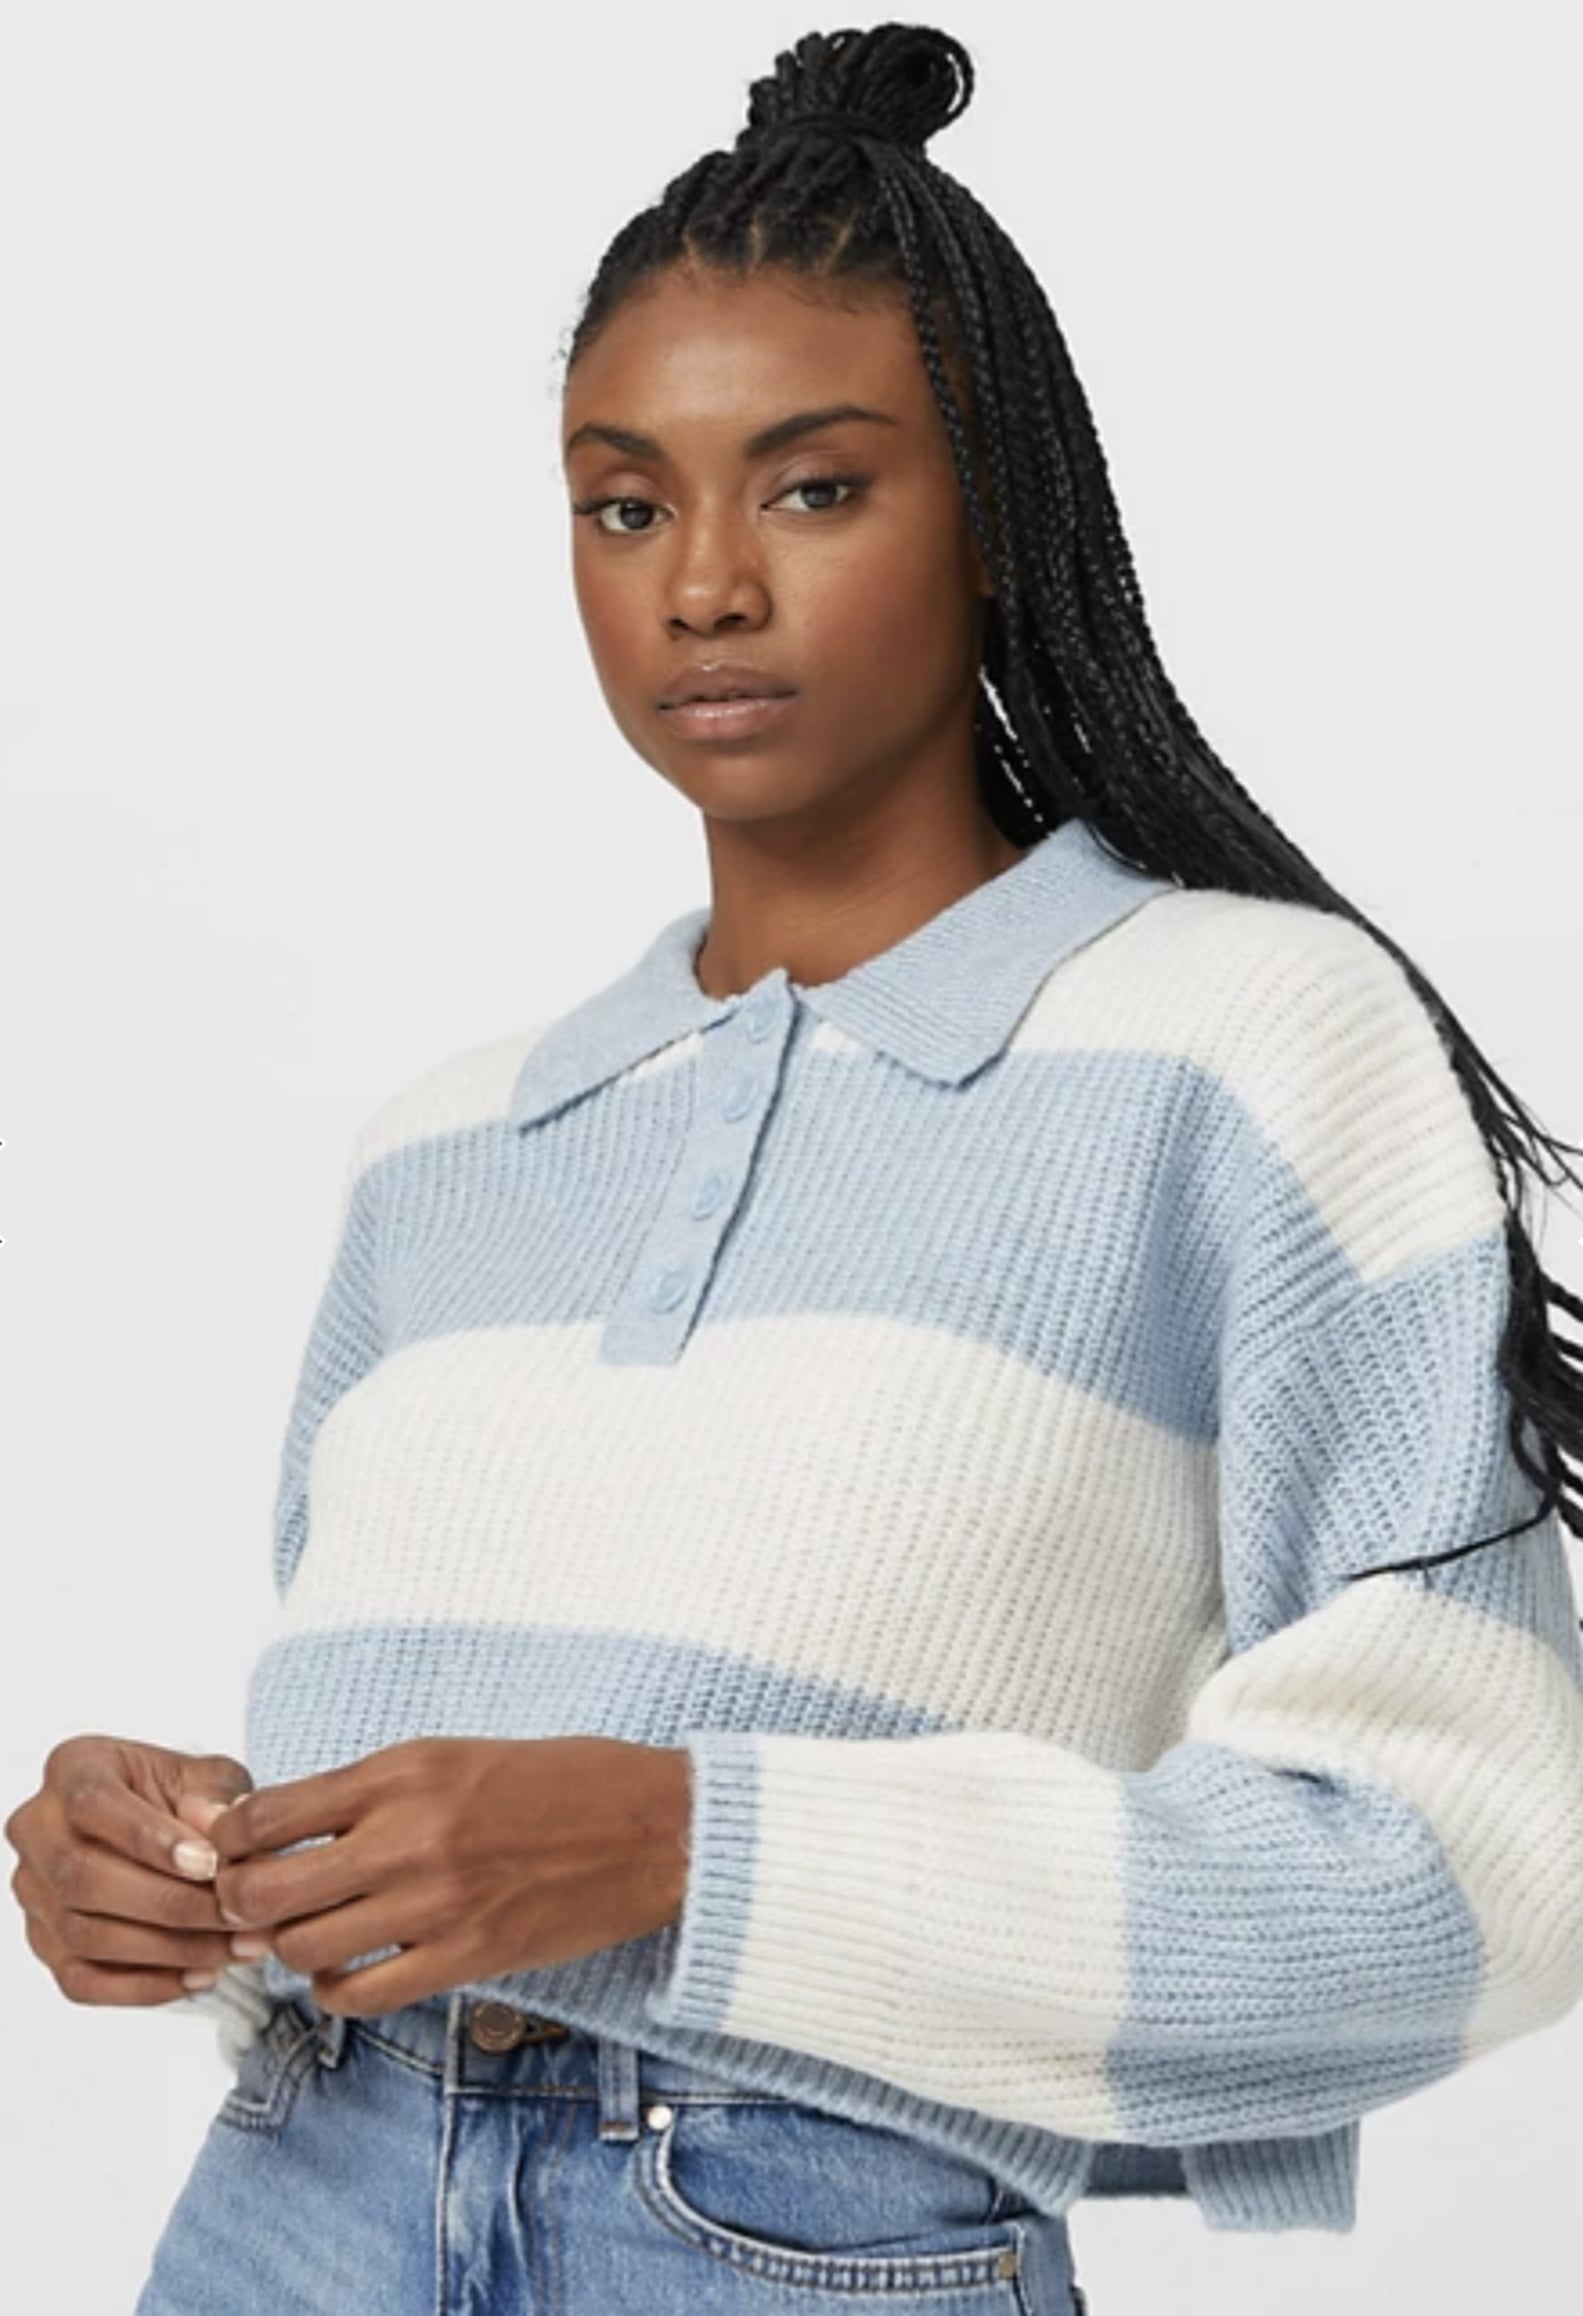 The Cutest Sweaters For Women to Shop in 2021 | POPSUGAR Fashion